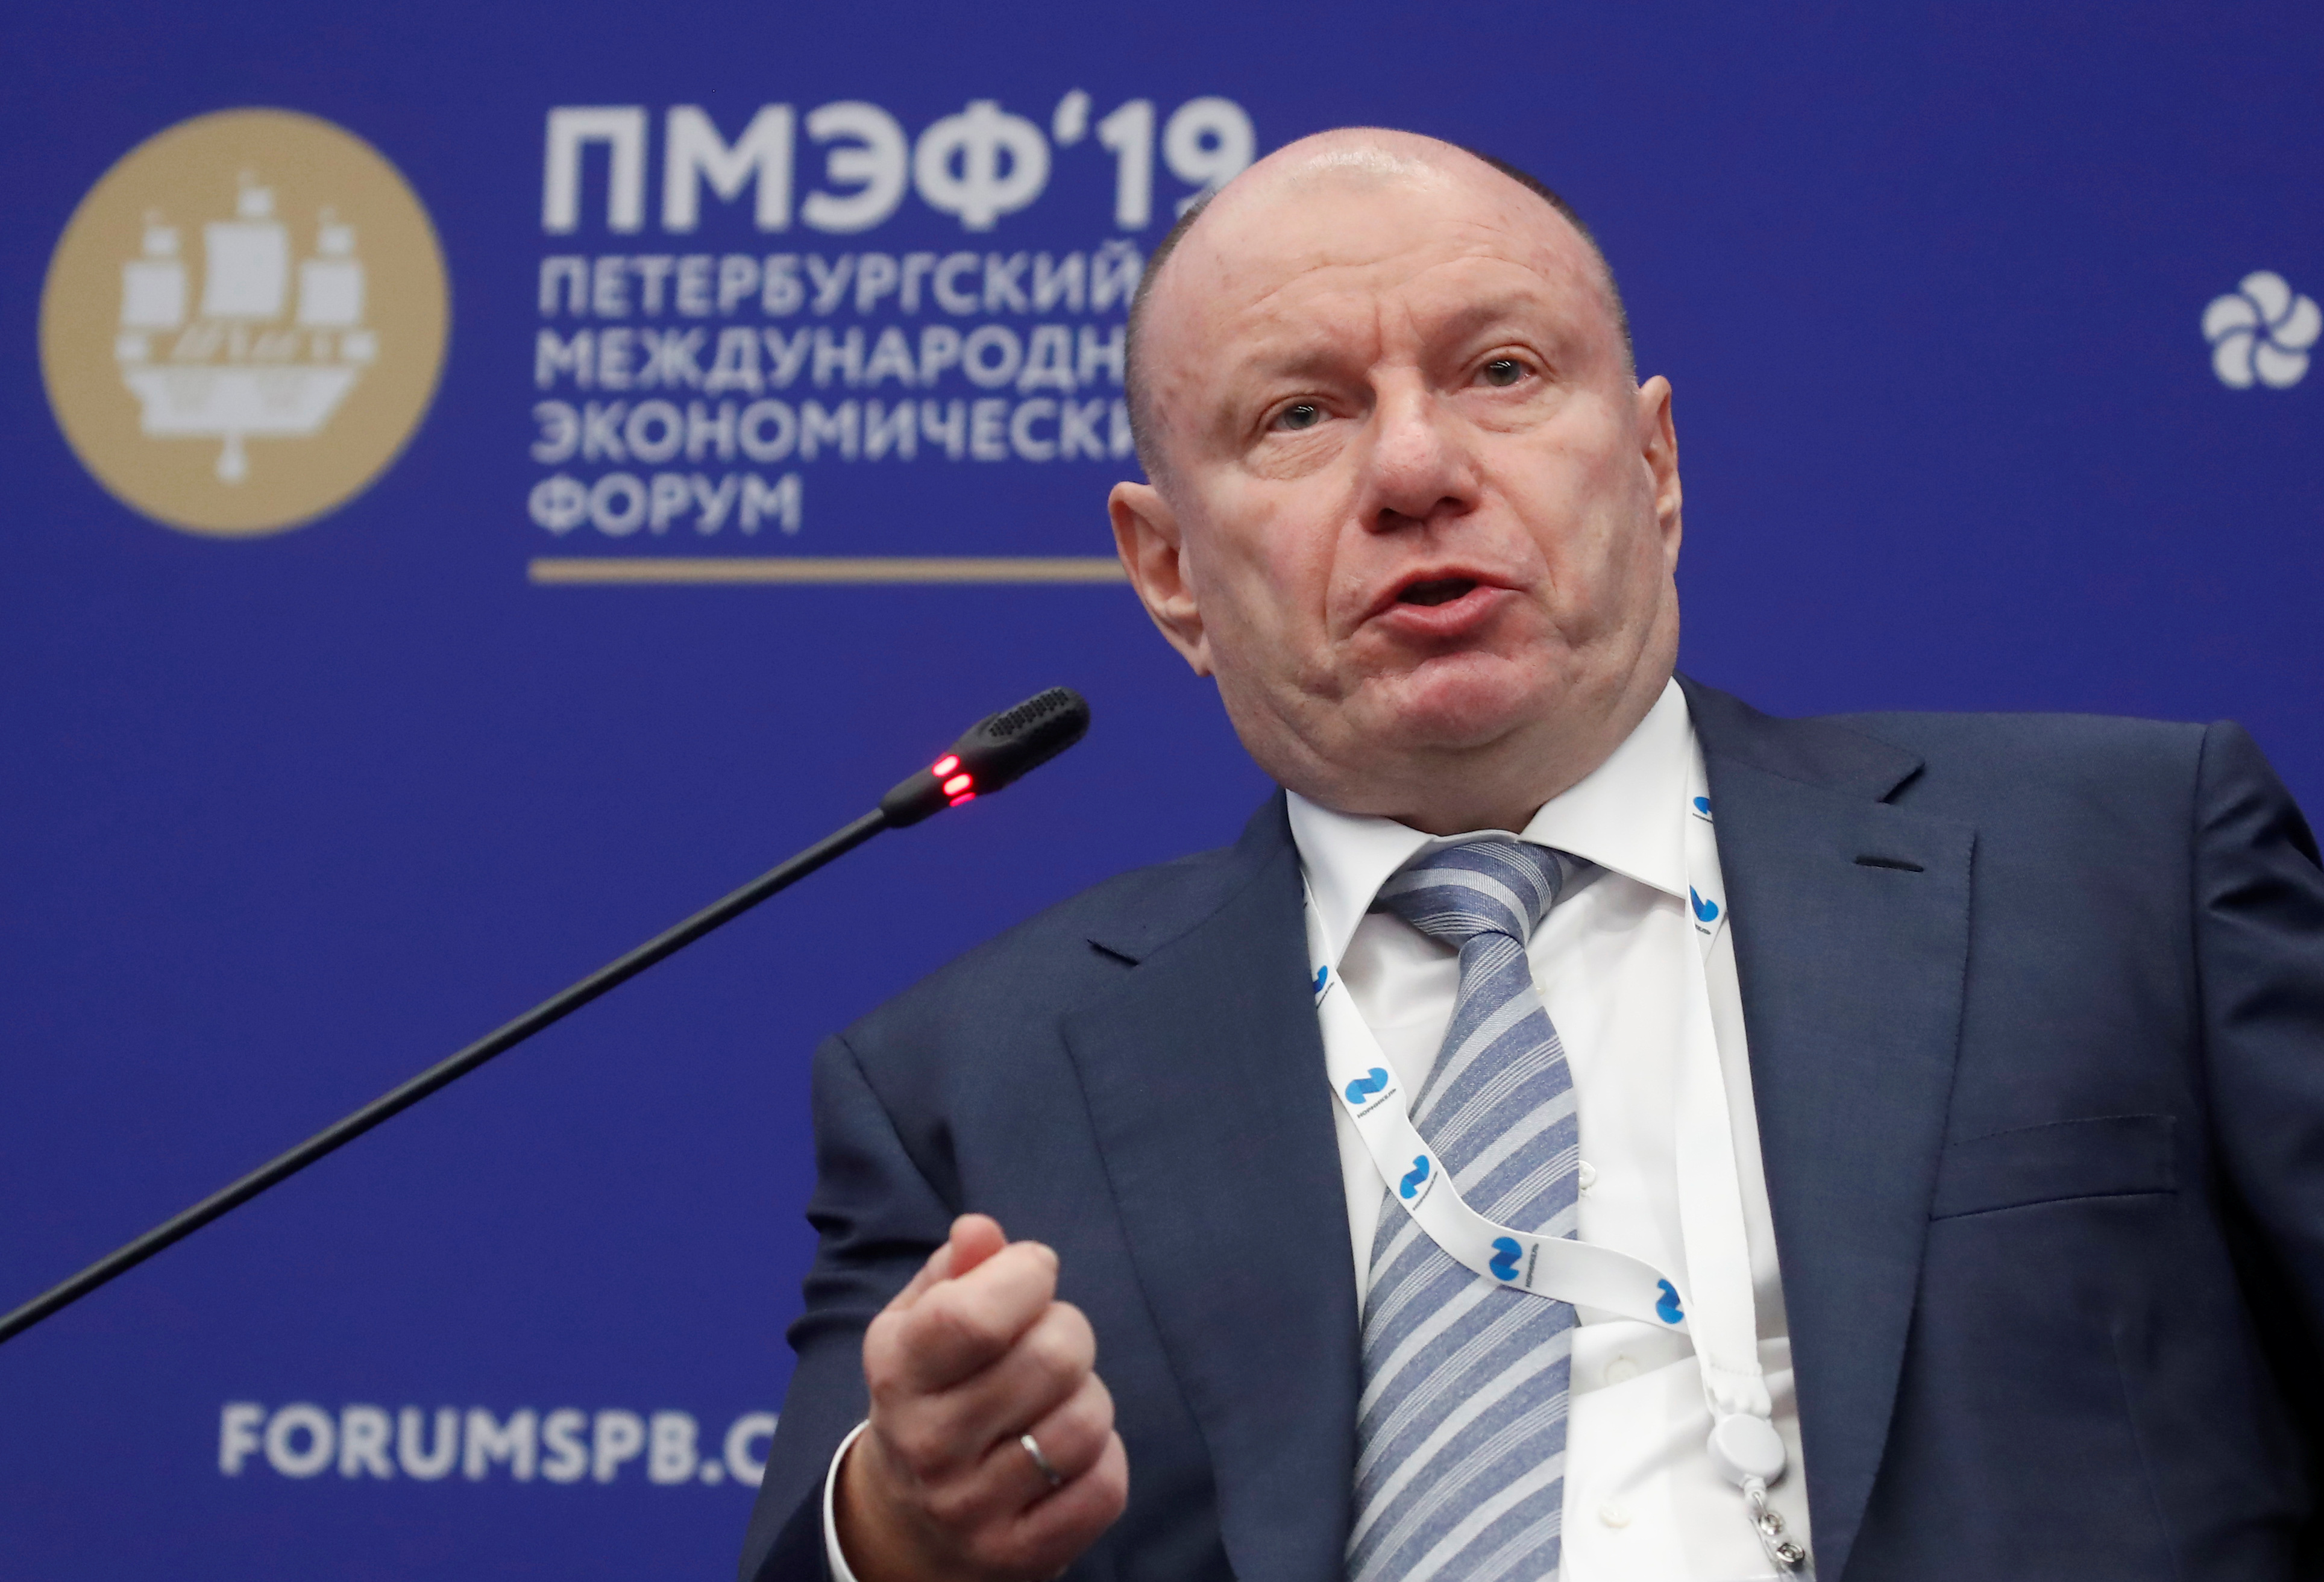 President and Chairman of the Board of MMC Norilsk Nickel Vladimir Potanin attends a session of the St. Petersburg International Economic Forum (SPIEF)